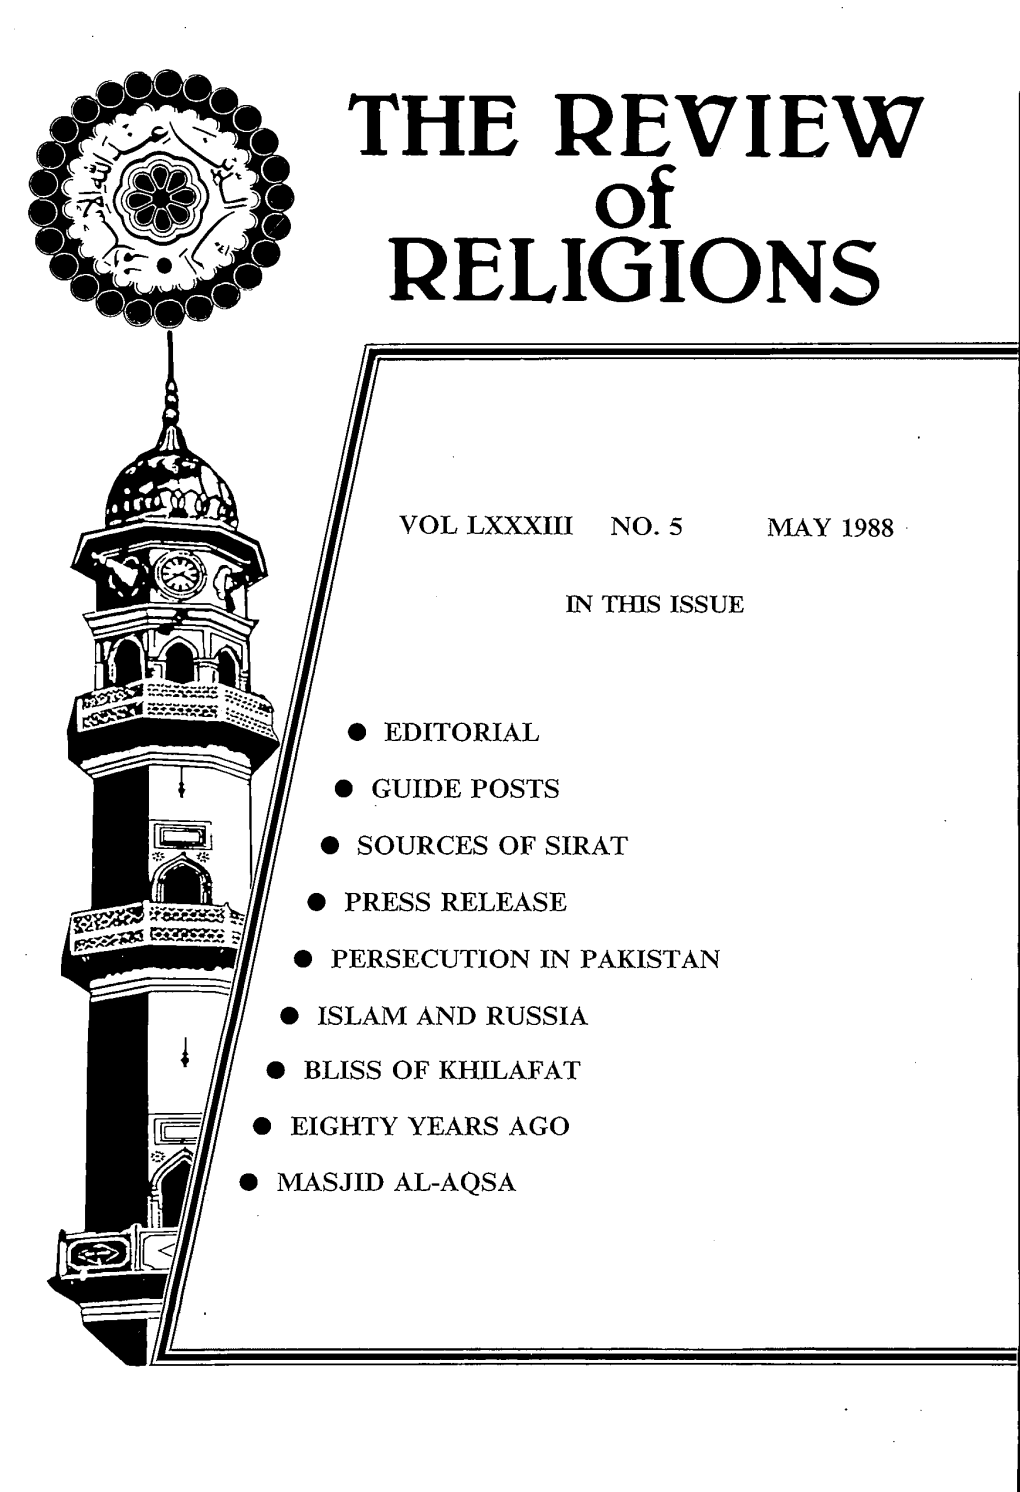 The Review of Religions, May 1988